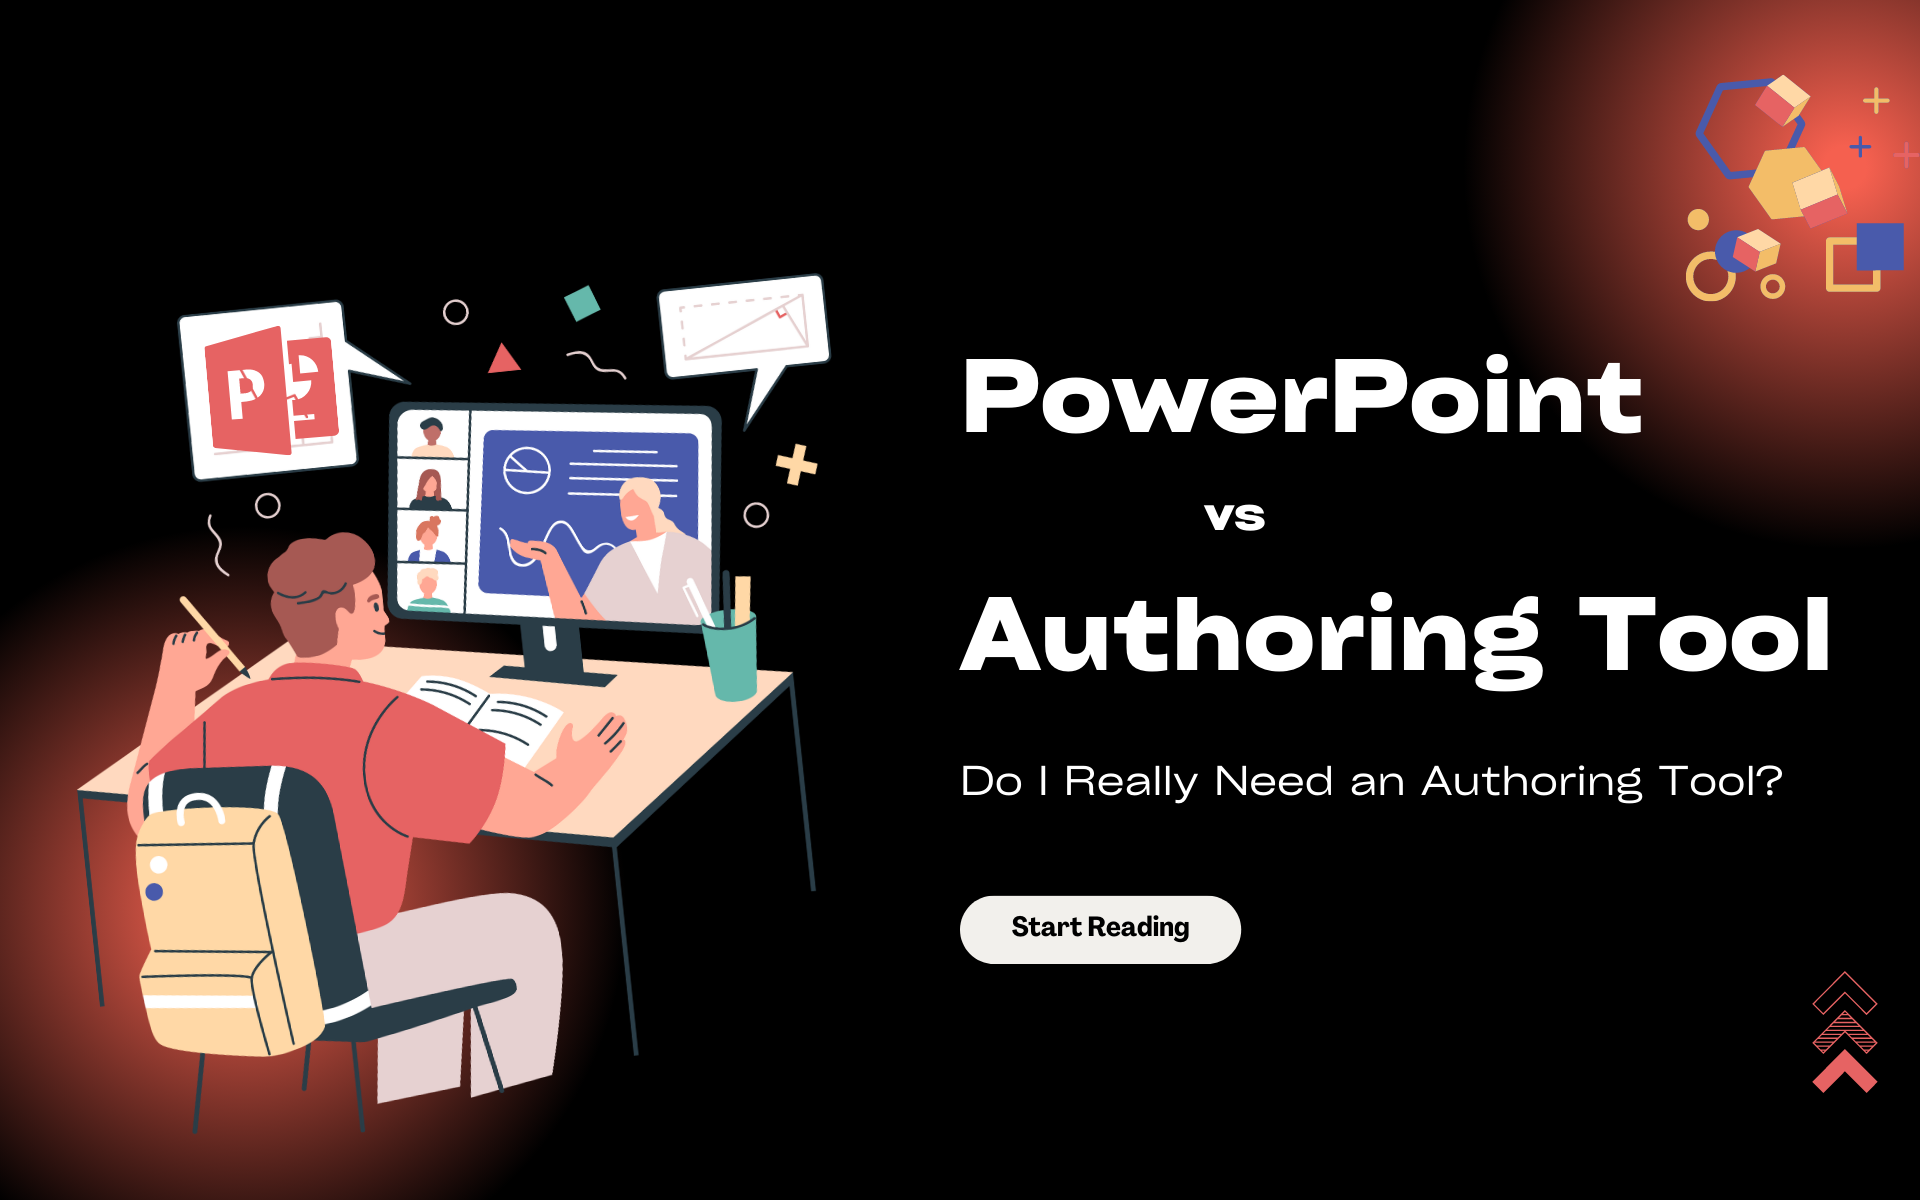 PPT vs Authoring Tool